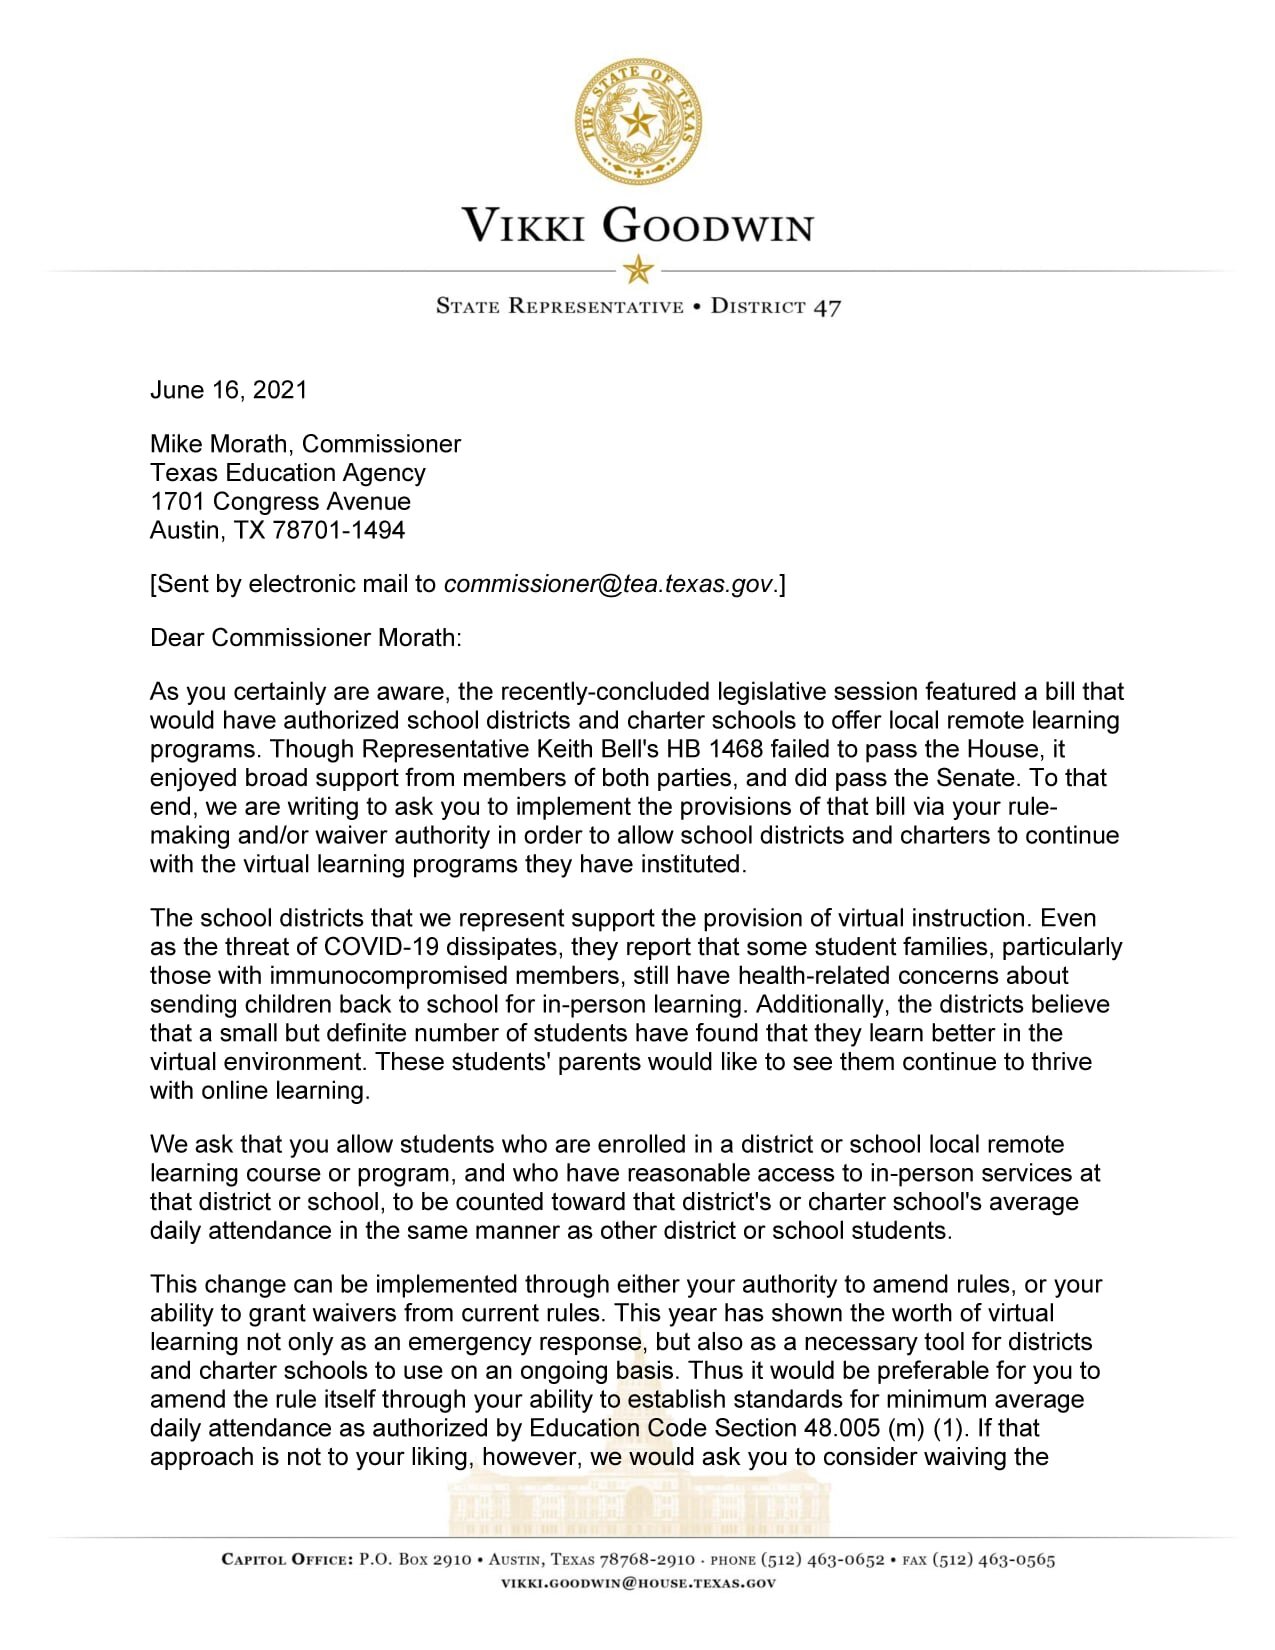  I, along with some of my House colleagues, sent a letter this morning to TEA urging Commissioner Morath to use his authority to allow school districts and charter schools to continue the virtual learning programs that have been invaluable to so many